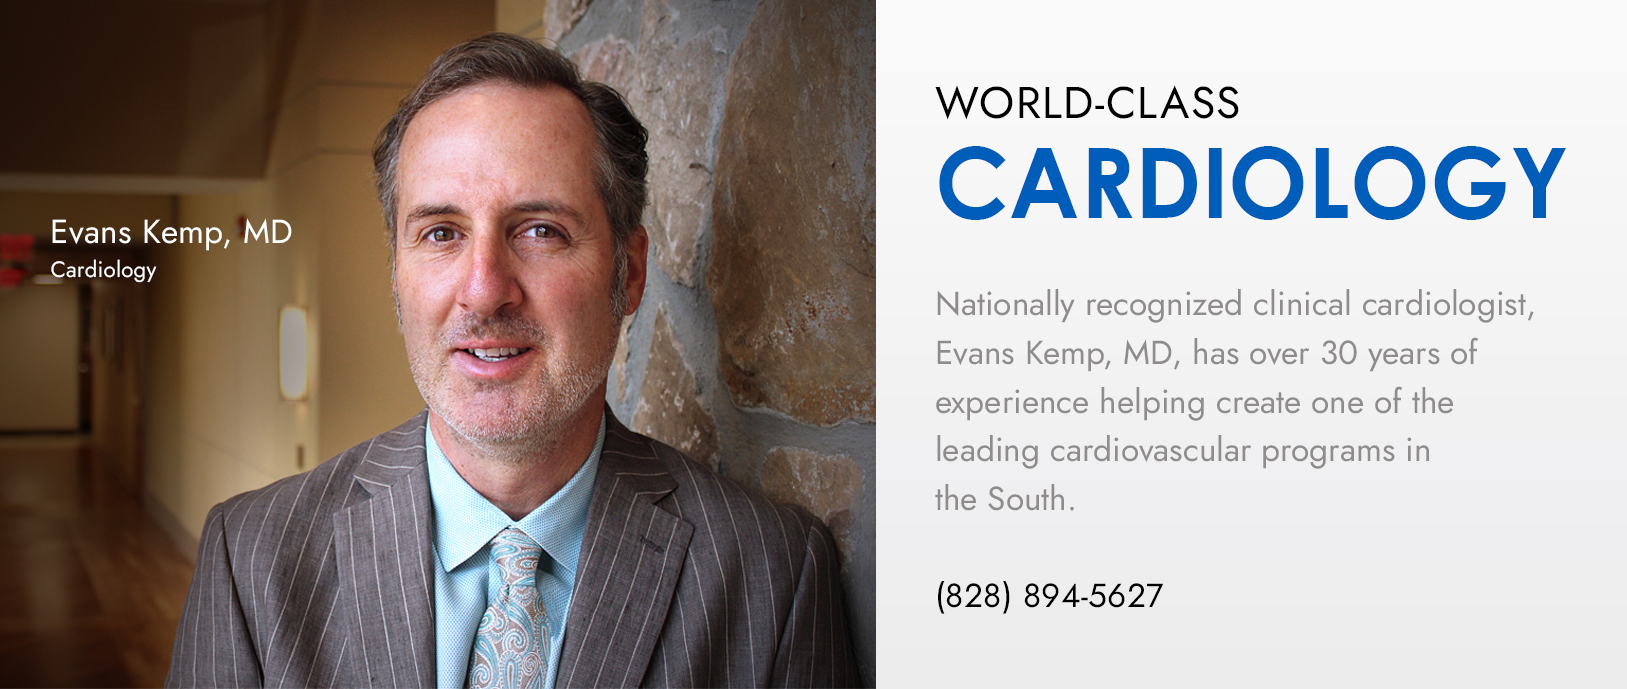 Banner picture of Dr. Evans Kemp smiling. Banner says:
Bringing world-class CARDIOLOGY to rural Polk County.
Valvular, Congenital, and Coronary Artery Disease  Structural Imaging and Preventive Cardiology Scheduling appointments now
Seeing patients beginning June, 2022
(828) 894-5627

St. Lukes
CARDIOLOGY